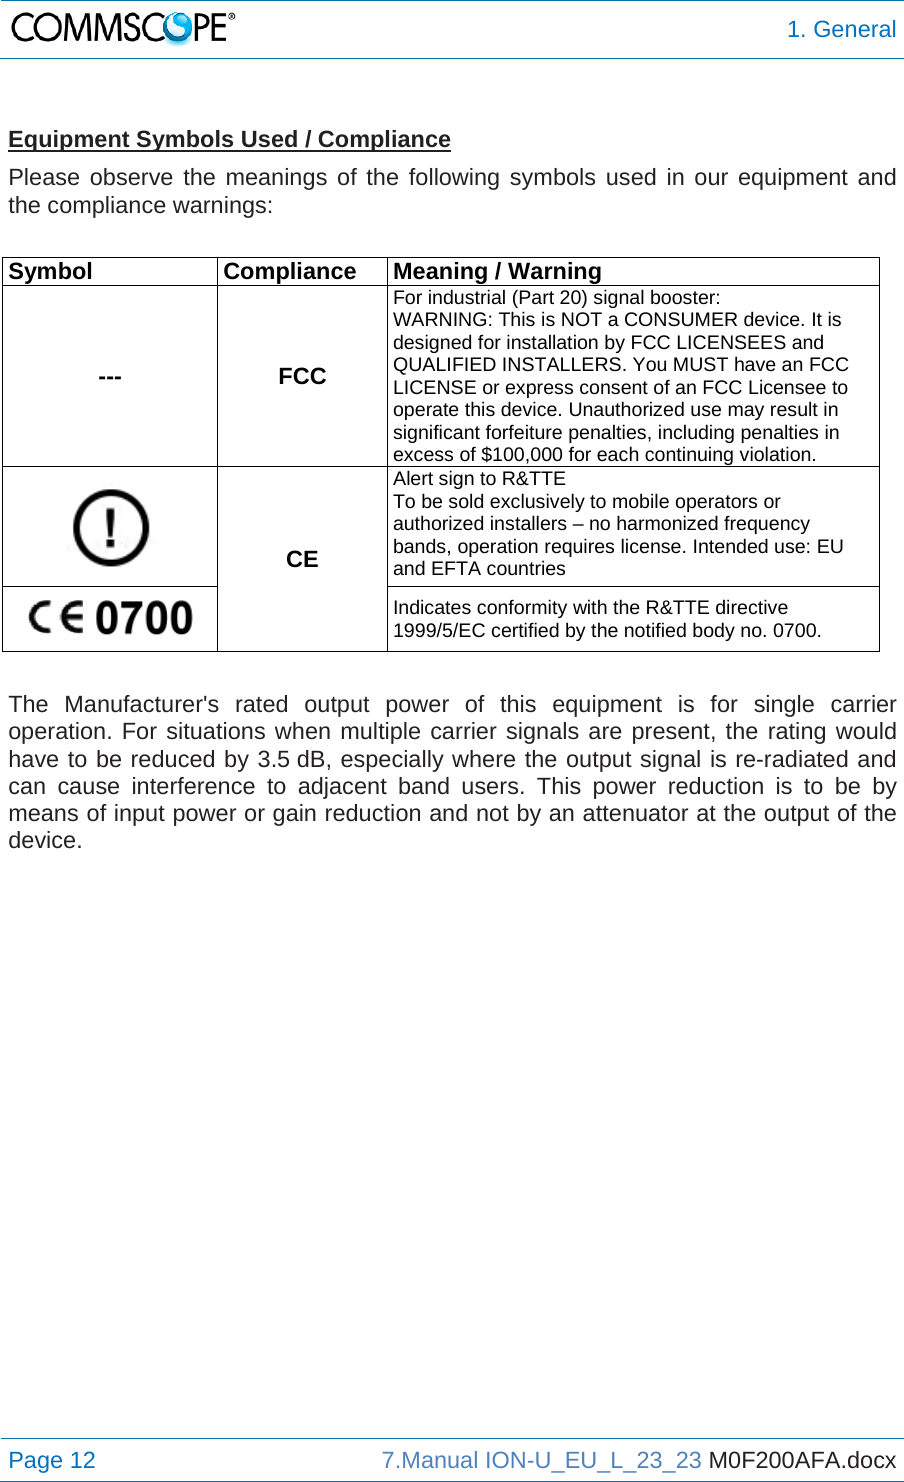  1. General Page 12  7.Manual ION-U_EU_L_23_23 M0F200AFA.docx   Equipment Symbols Used / Compliance Please observe the meanings of the following symbols used in our equipment and the compliance warnings:  Symbol  Compliance  Meaning / Warning --- FCC For industrial (Part 20) signal booster: WARNING: This is NOT a CONSUMER device. It is designed for installation by FCC LICENSEES and QUALIFIED INSTALLERS. You MUST have an FCC LICENSE or express consent of an FCC Licensee to operate this device. Unauthorized use may result in significant forfeiture penalties, including penalties in excess of $100,000 for each continuing violation.  CE Alert sign to R&amp;TTE To be sold exclusively to mobile operators or authorized installers – no harmonized frequency bands, operation requires license. Intended use: EU and EFTA countries  Indicates conformity with the R&amp;TTE directive 1999/5/EC certified by the notified body no. 0700.  The Manufacturer&apos;s rated output power of this equipment is for single carrier operation. For situations when multiple carrier signals are present, the rating would have to be reduced by 3.5 dB, especially where the output signal is re-radiated and can cause interference to adjacent band users. This power reduction is to be by means of input power or gain reduction and not by an attenuator at the output of the device.   